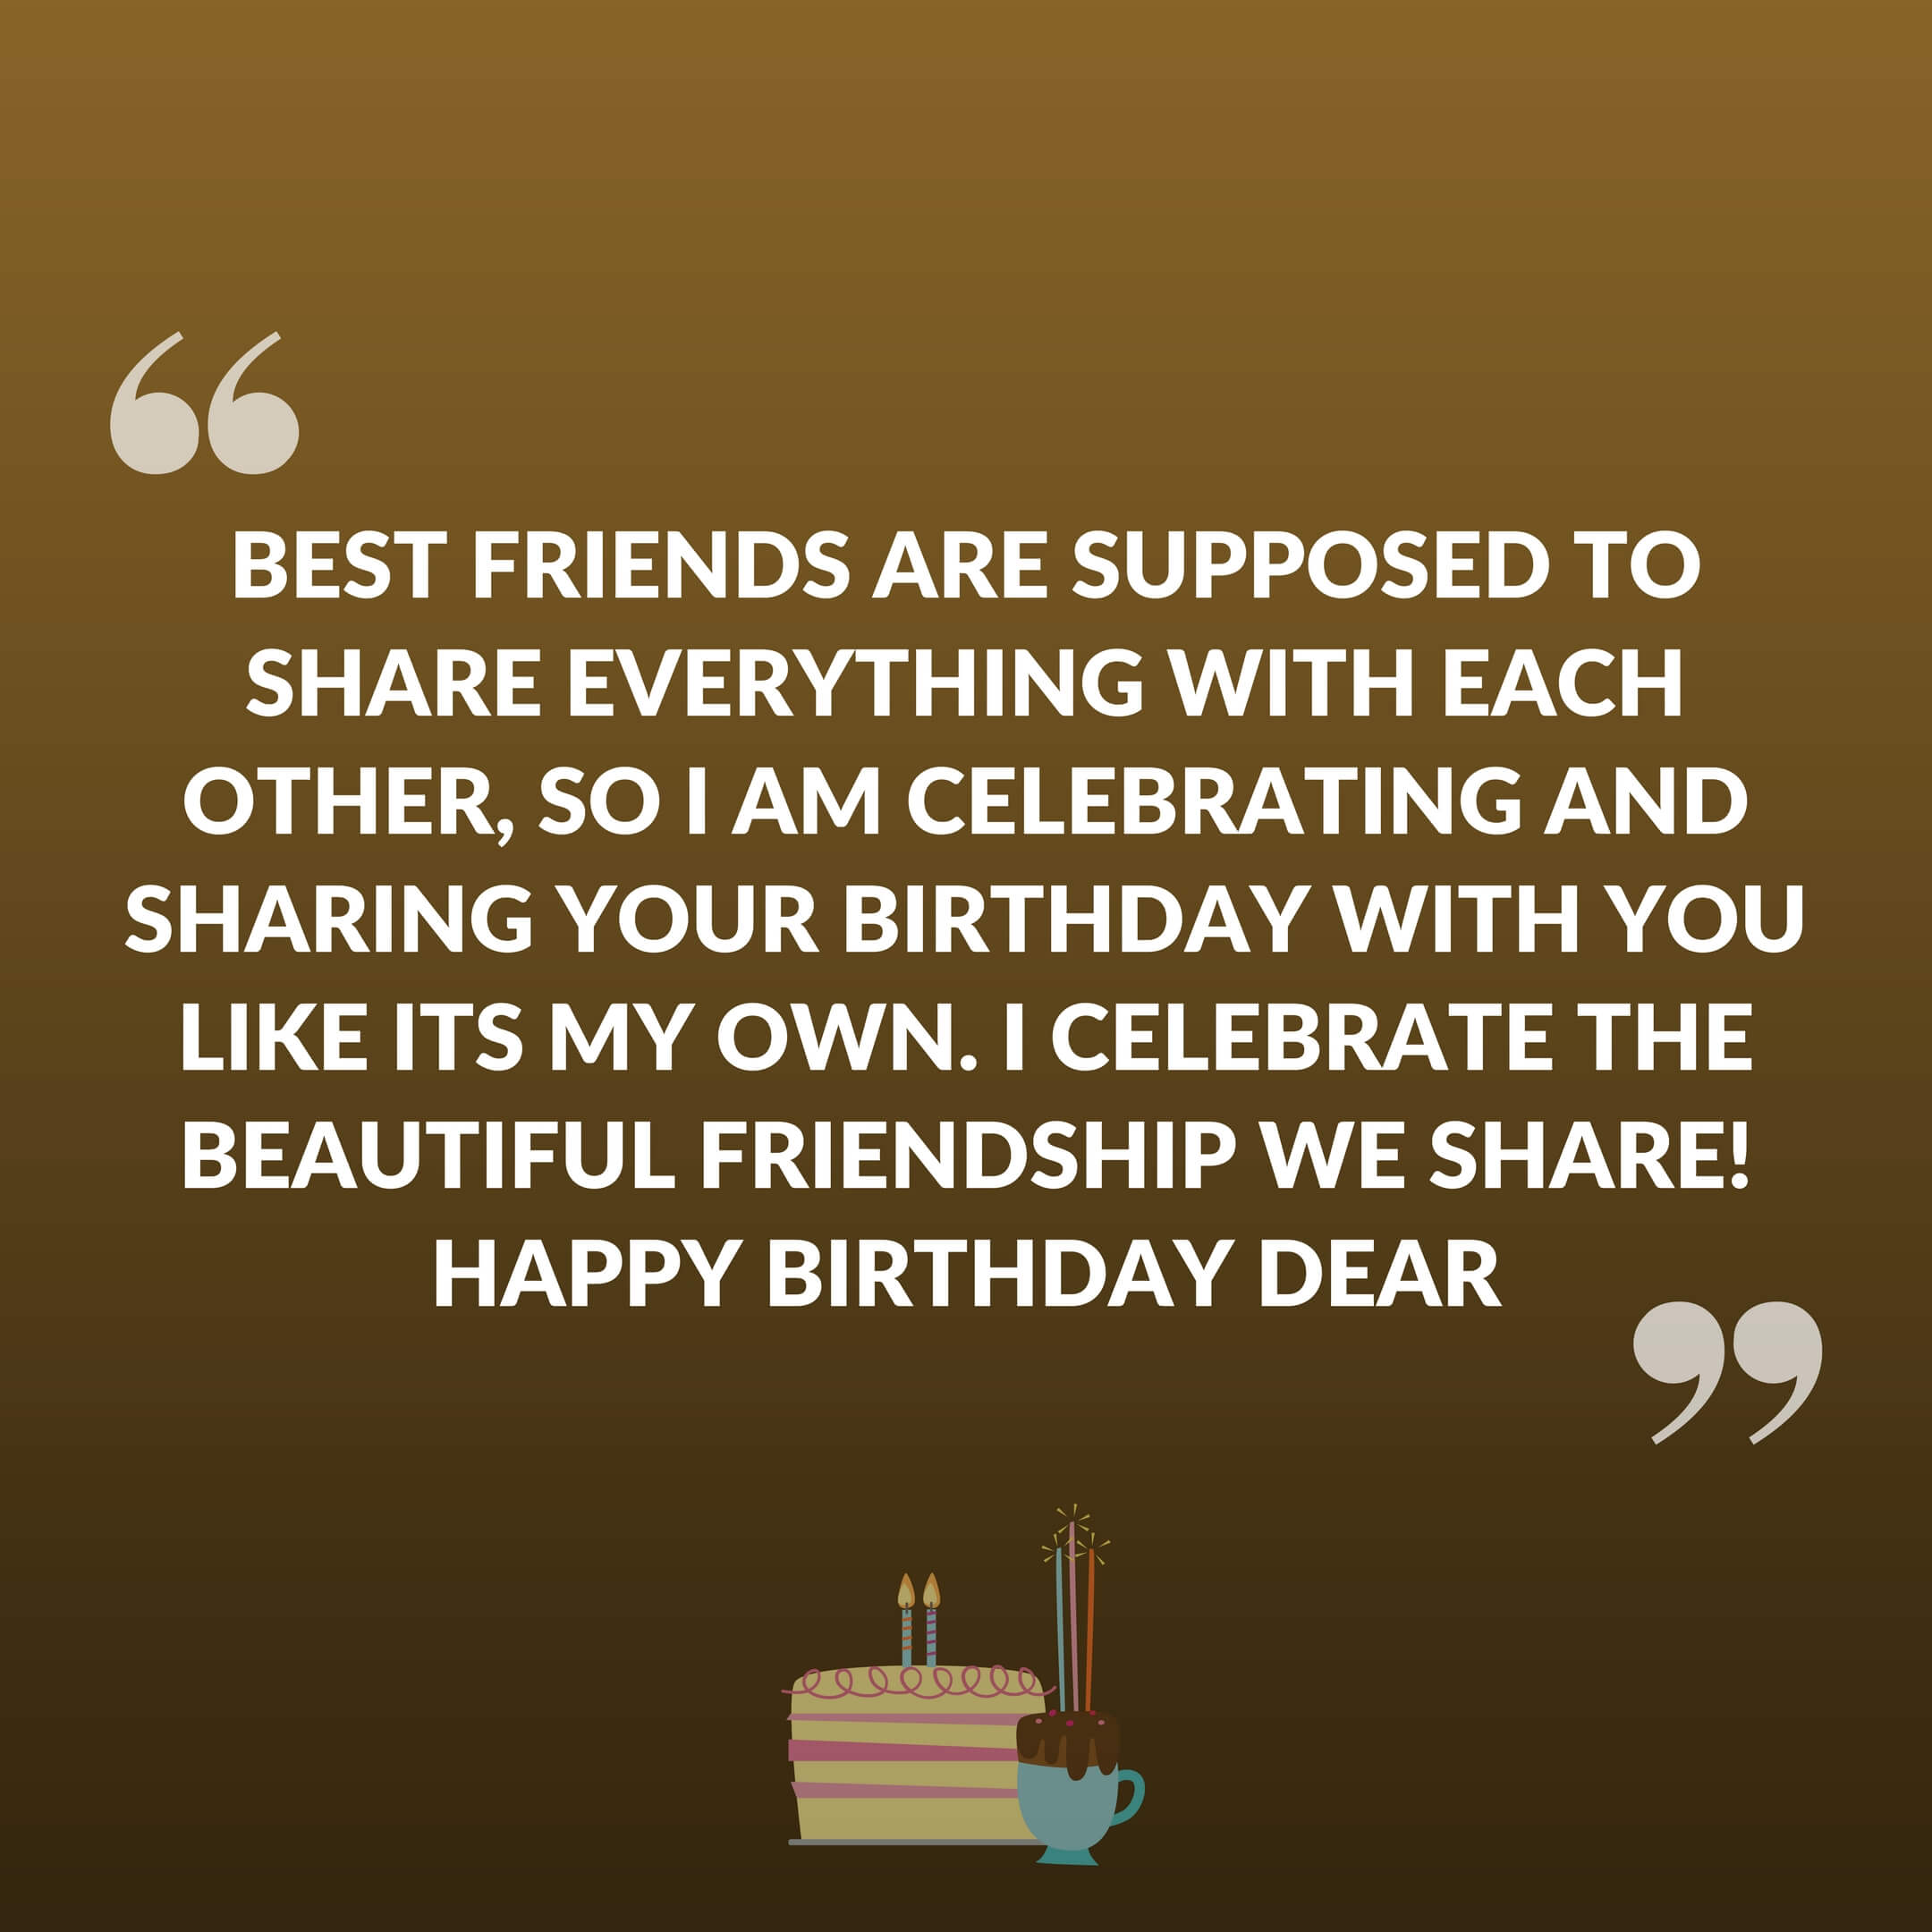 Best friends are supposed to share everything with each other, so I am celebrating and sharing your birthday with you like its my own. I celebrate the beautiful friendship we share! Happy Birthday Dear